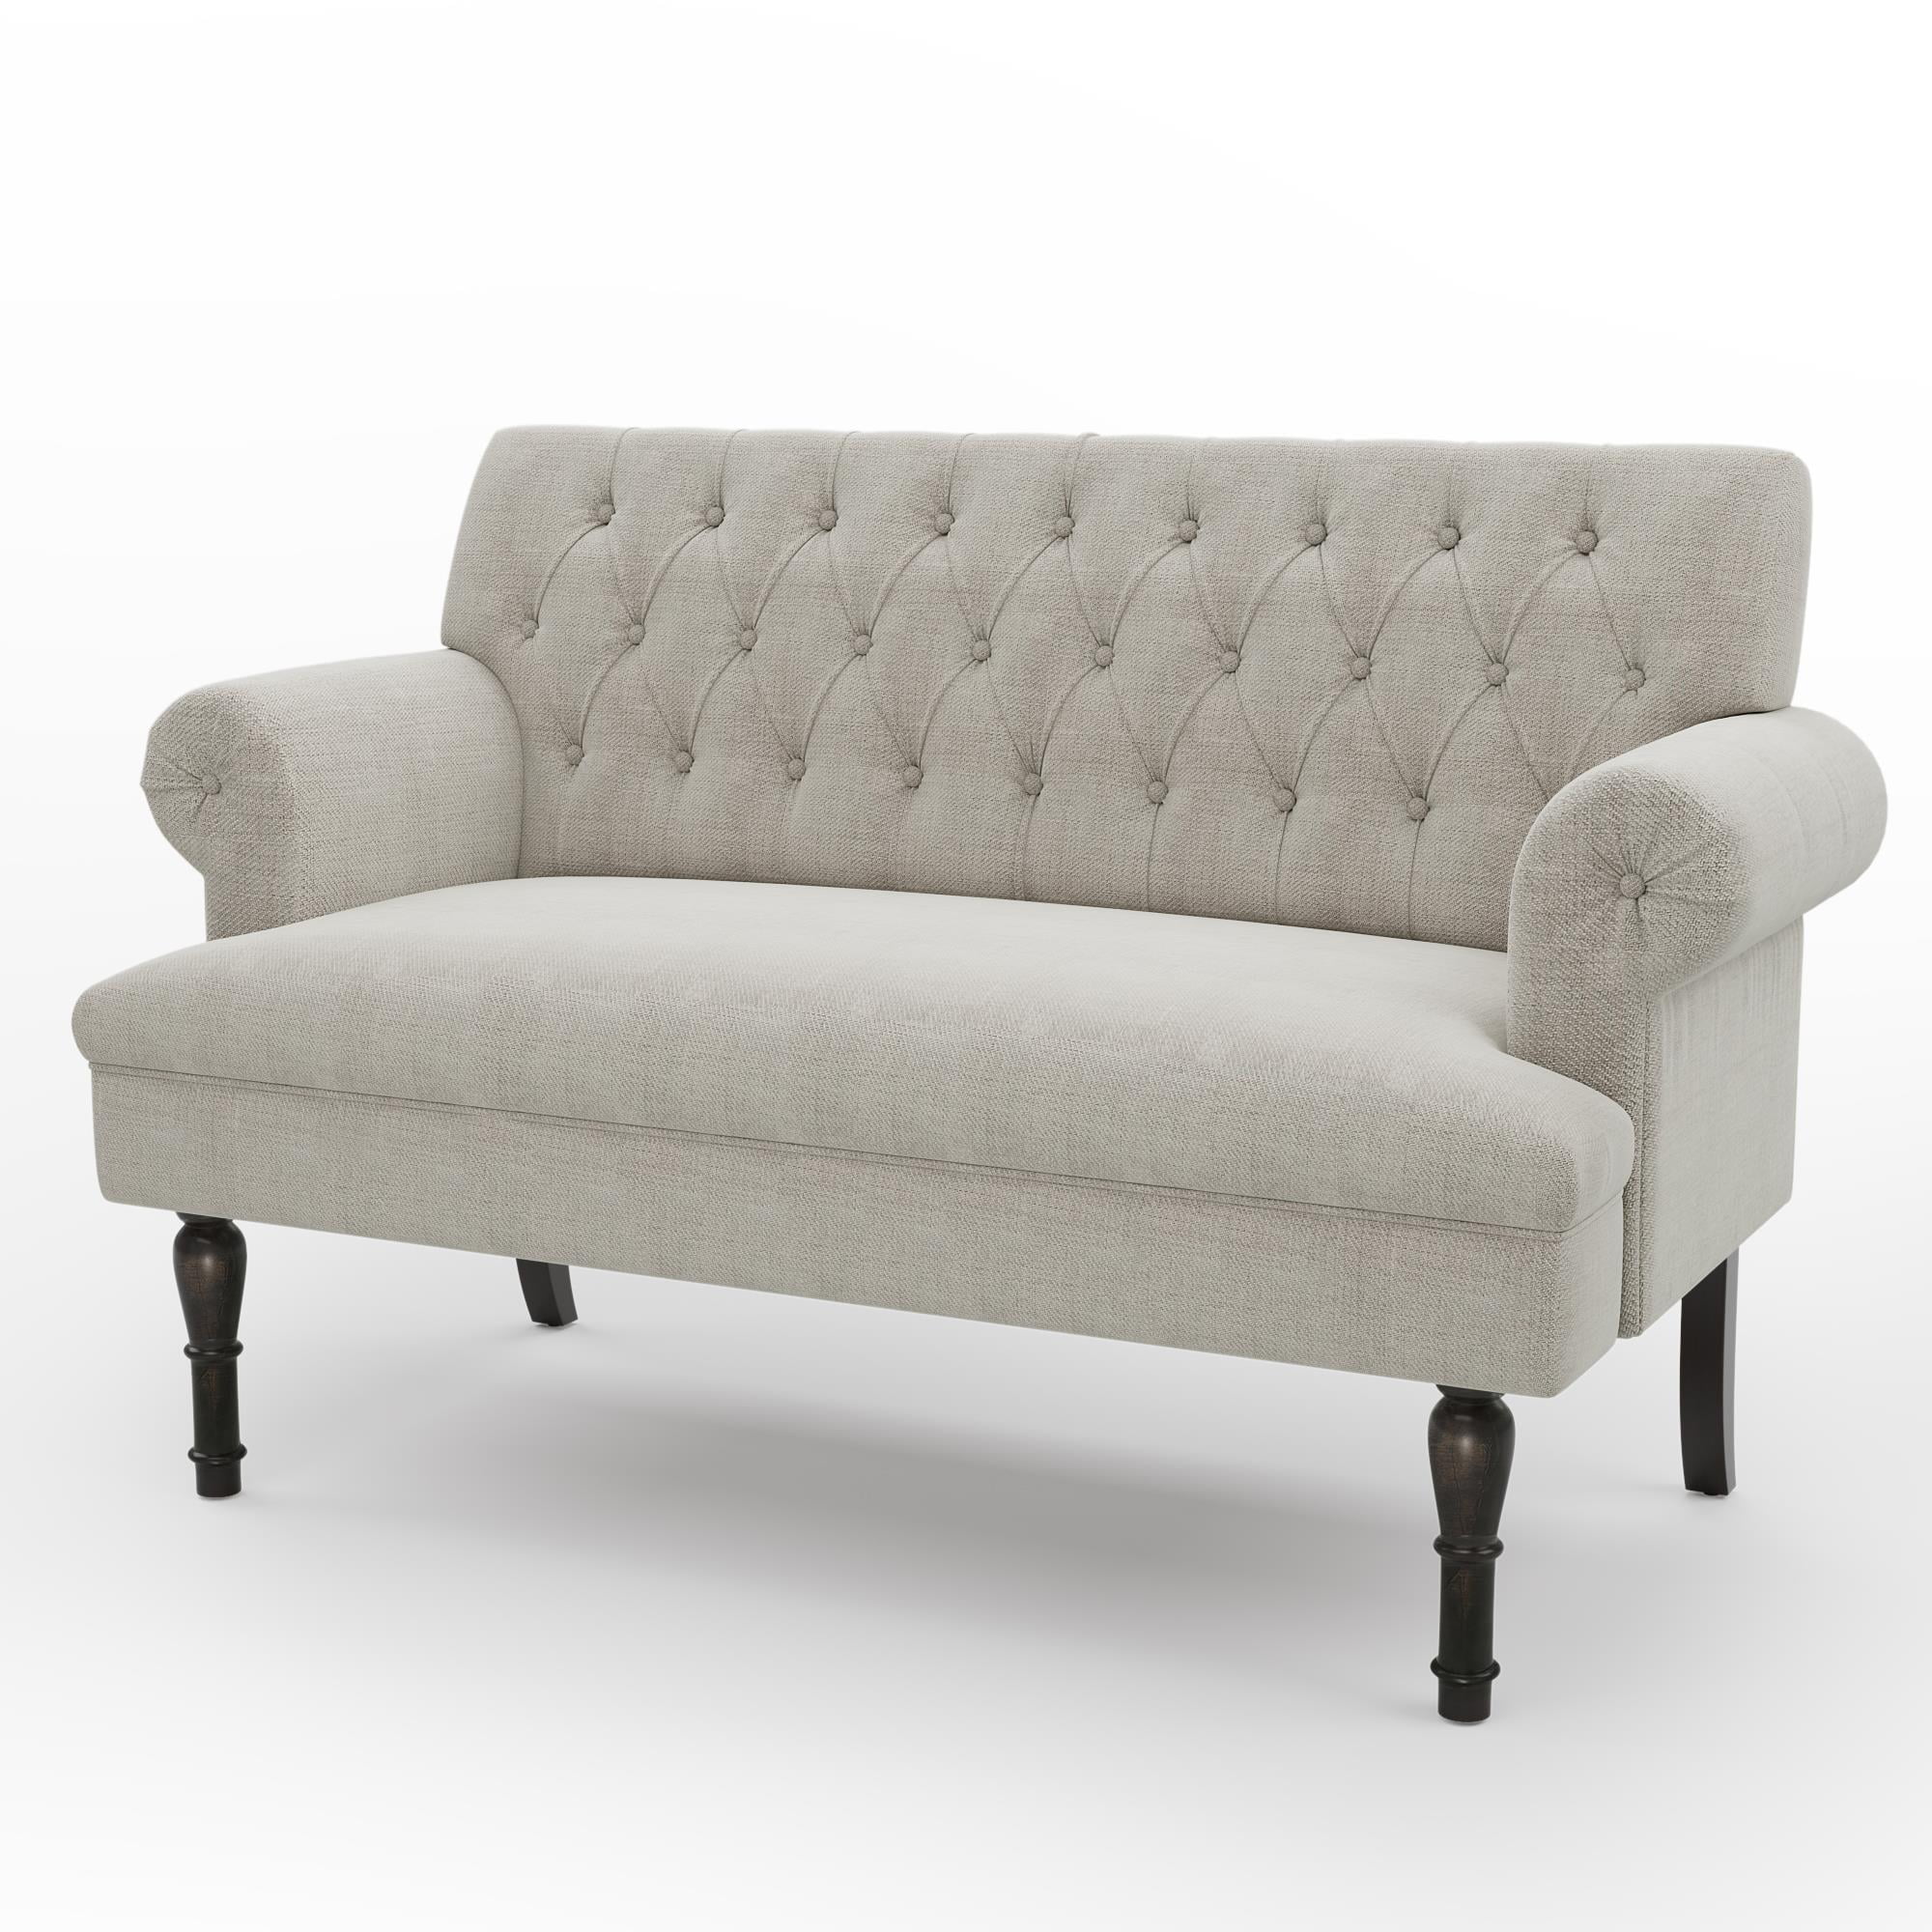 BaytoCare Fabric Chesterfield Settee Button Tufted Scrolled Arm ...